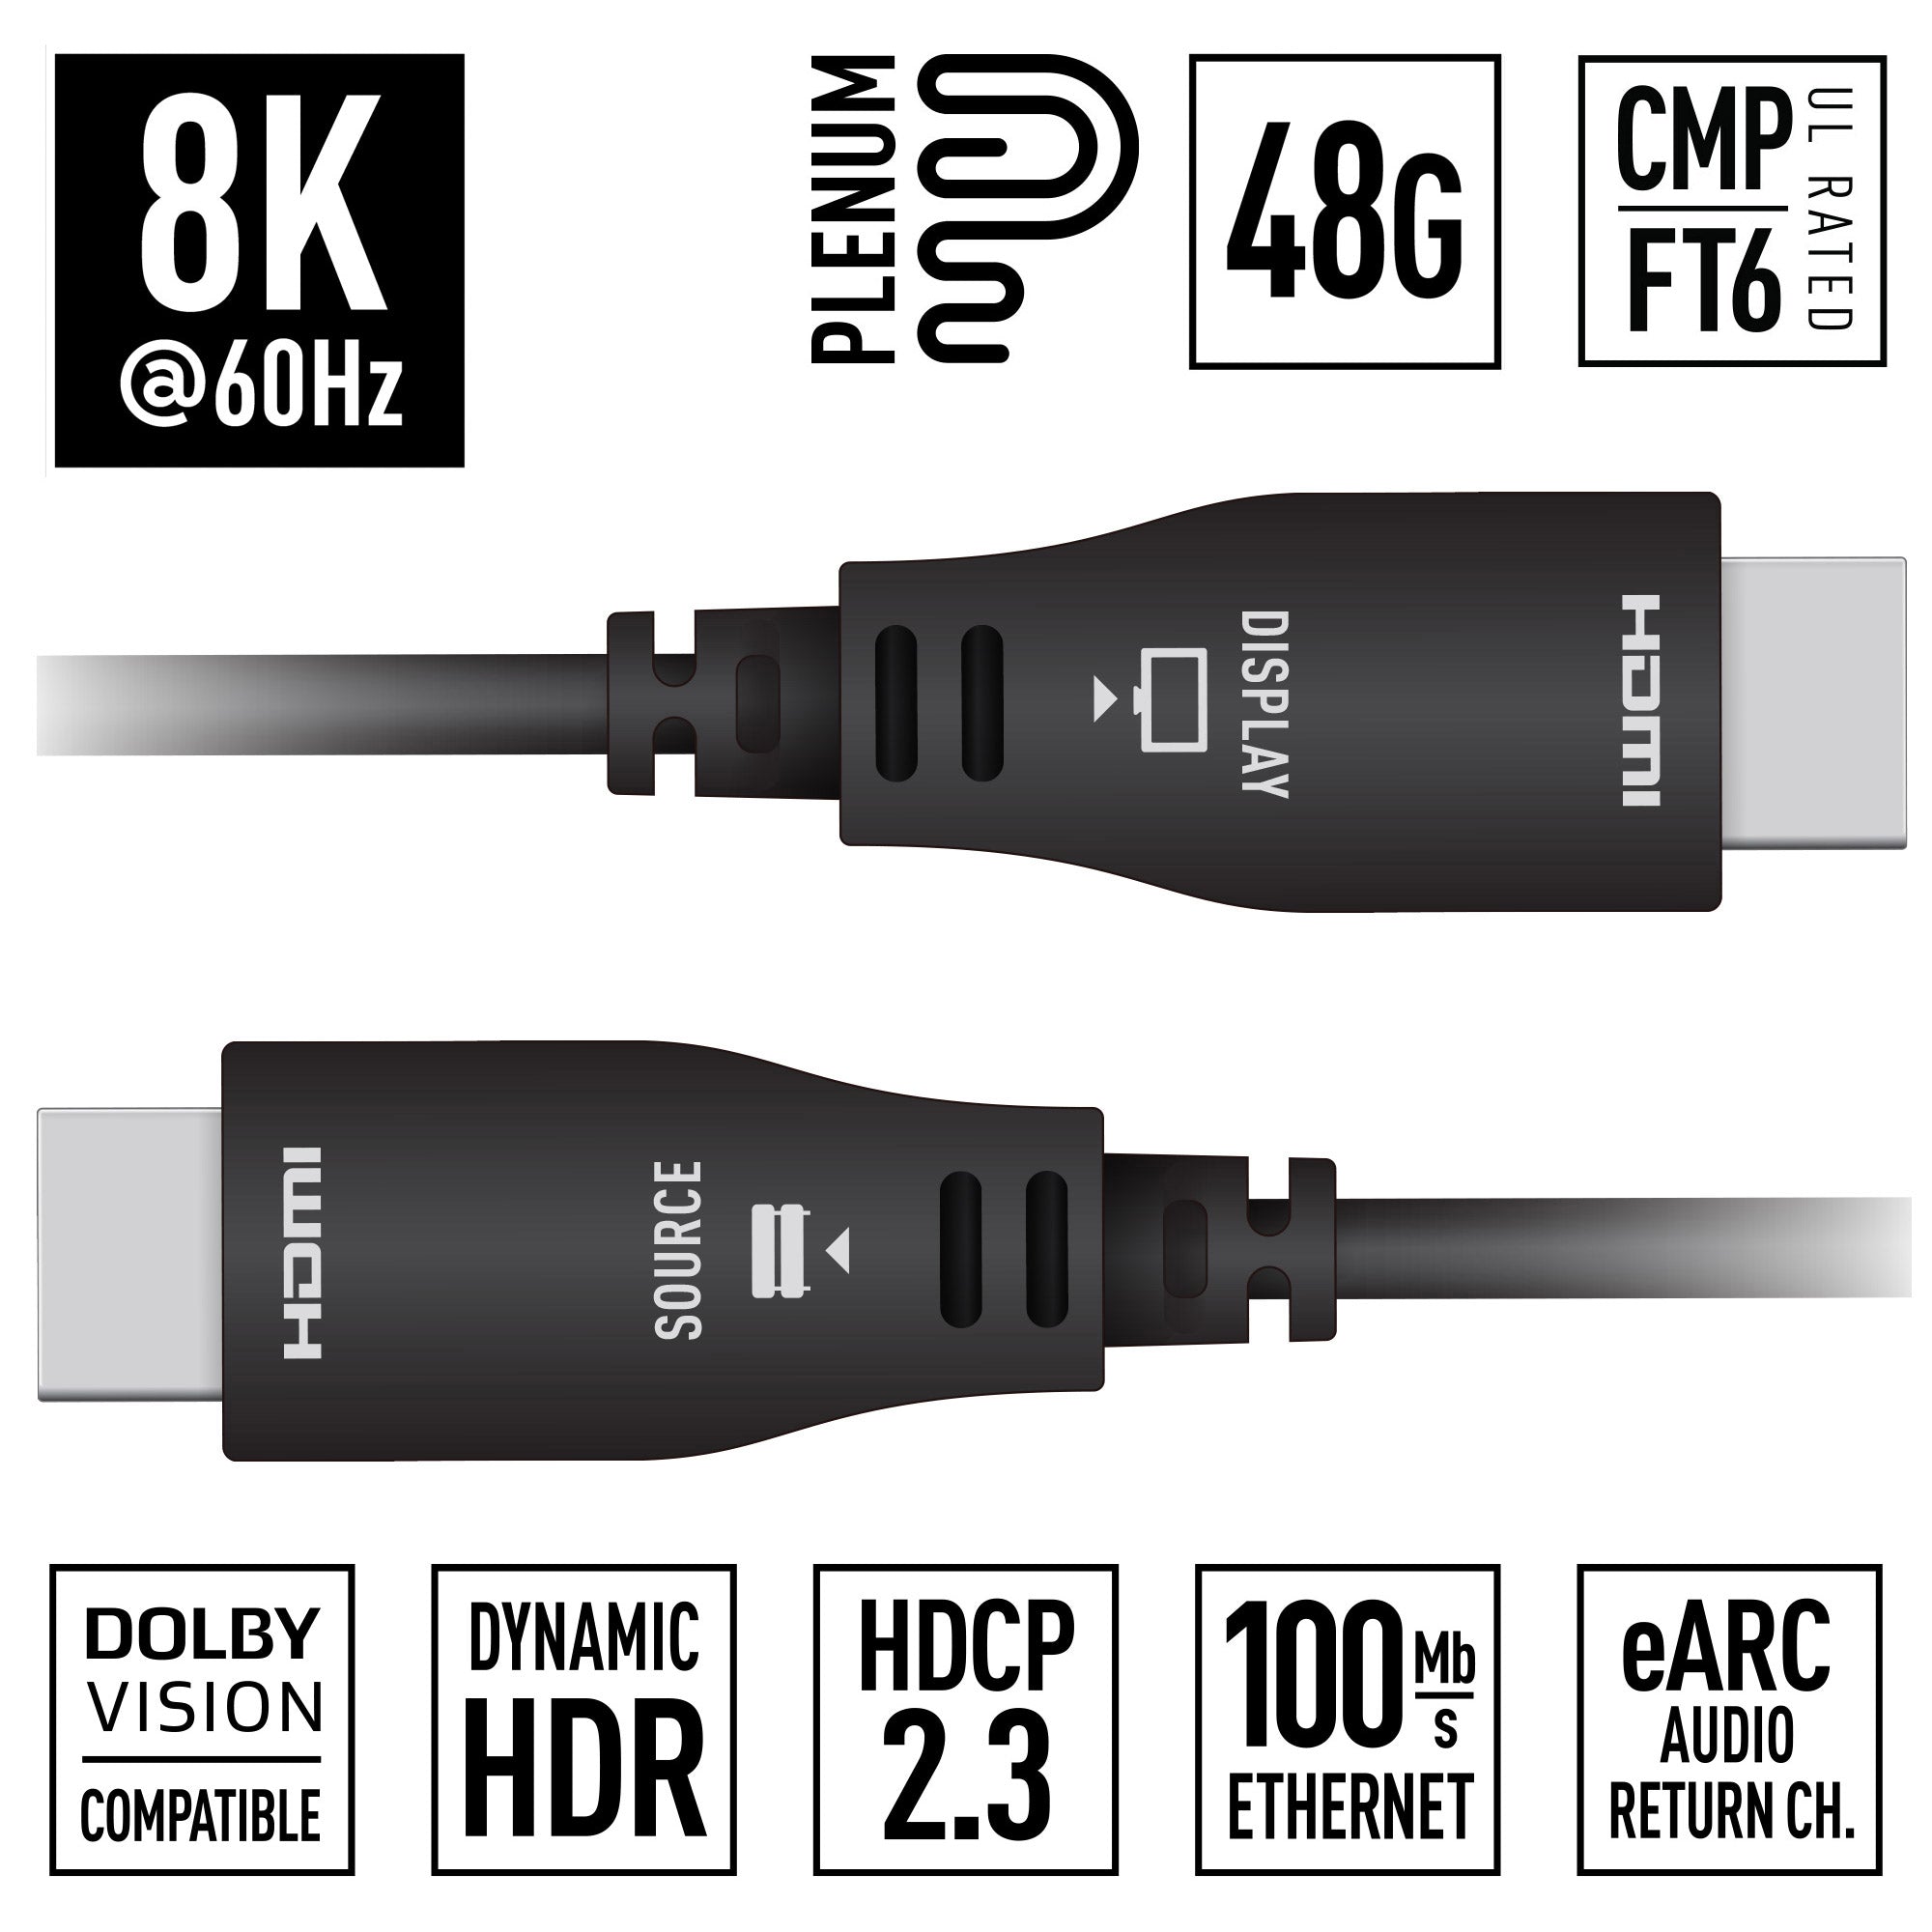 Key Digital 164FT (50M) 8K/48G Plenum Hybrid Fiber Optic Ultra High Speed HDMI Cable. Supports Dynamic HDR, Dolby® Vision, HDCP2.3, eARC, CMP / FT6 UL Rated - KD-AOCH164P